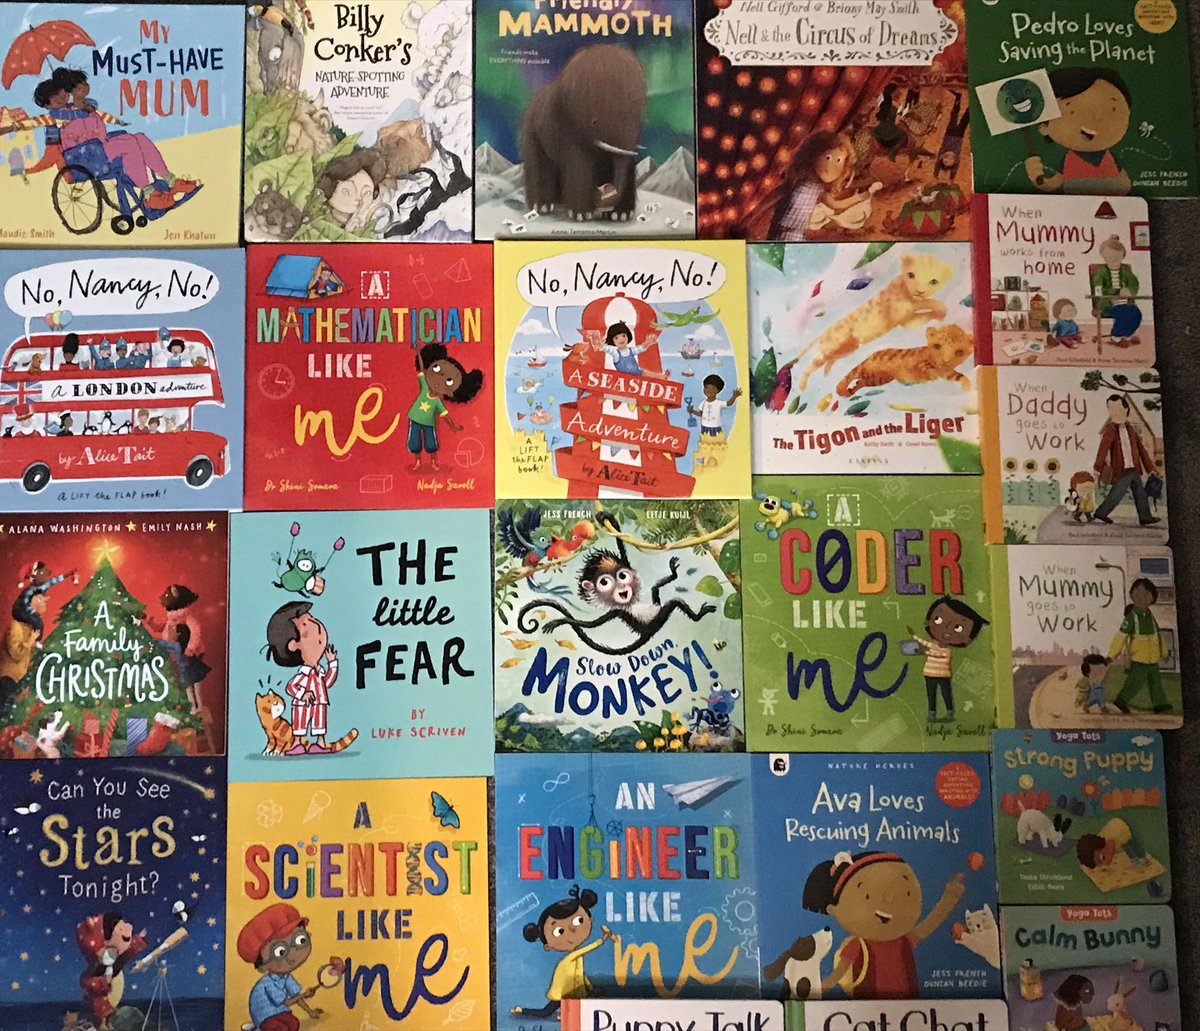 We’re talking picture books and how to make a first impression with The Golden Egg Academy tomorrow…do shout if you would like to come along charlotte@goldeneggacademy